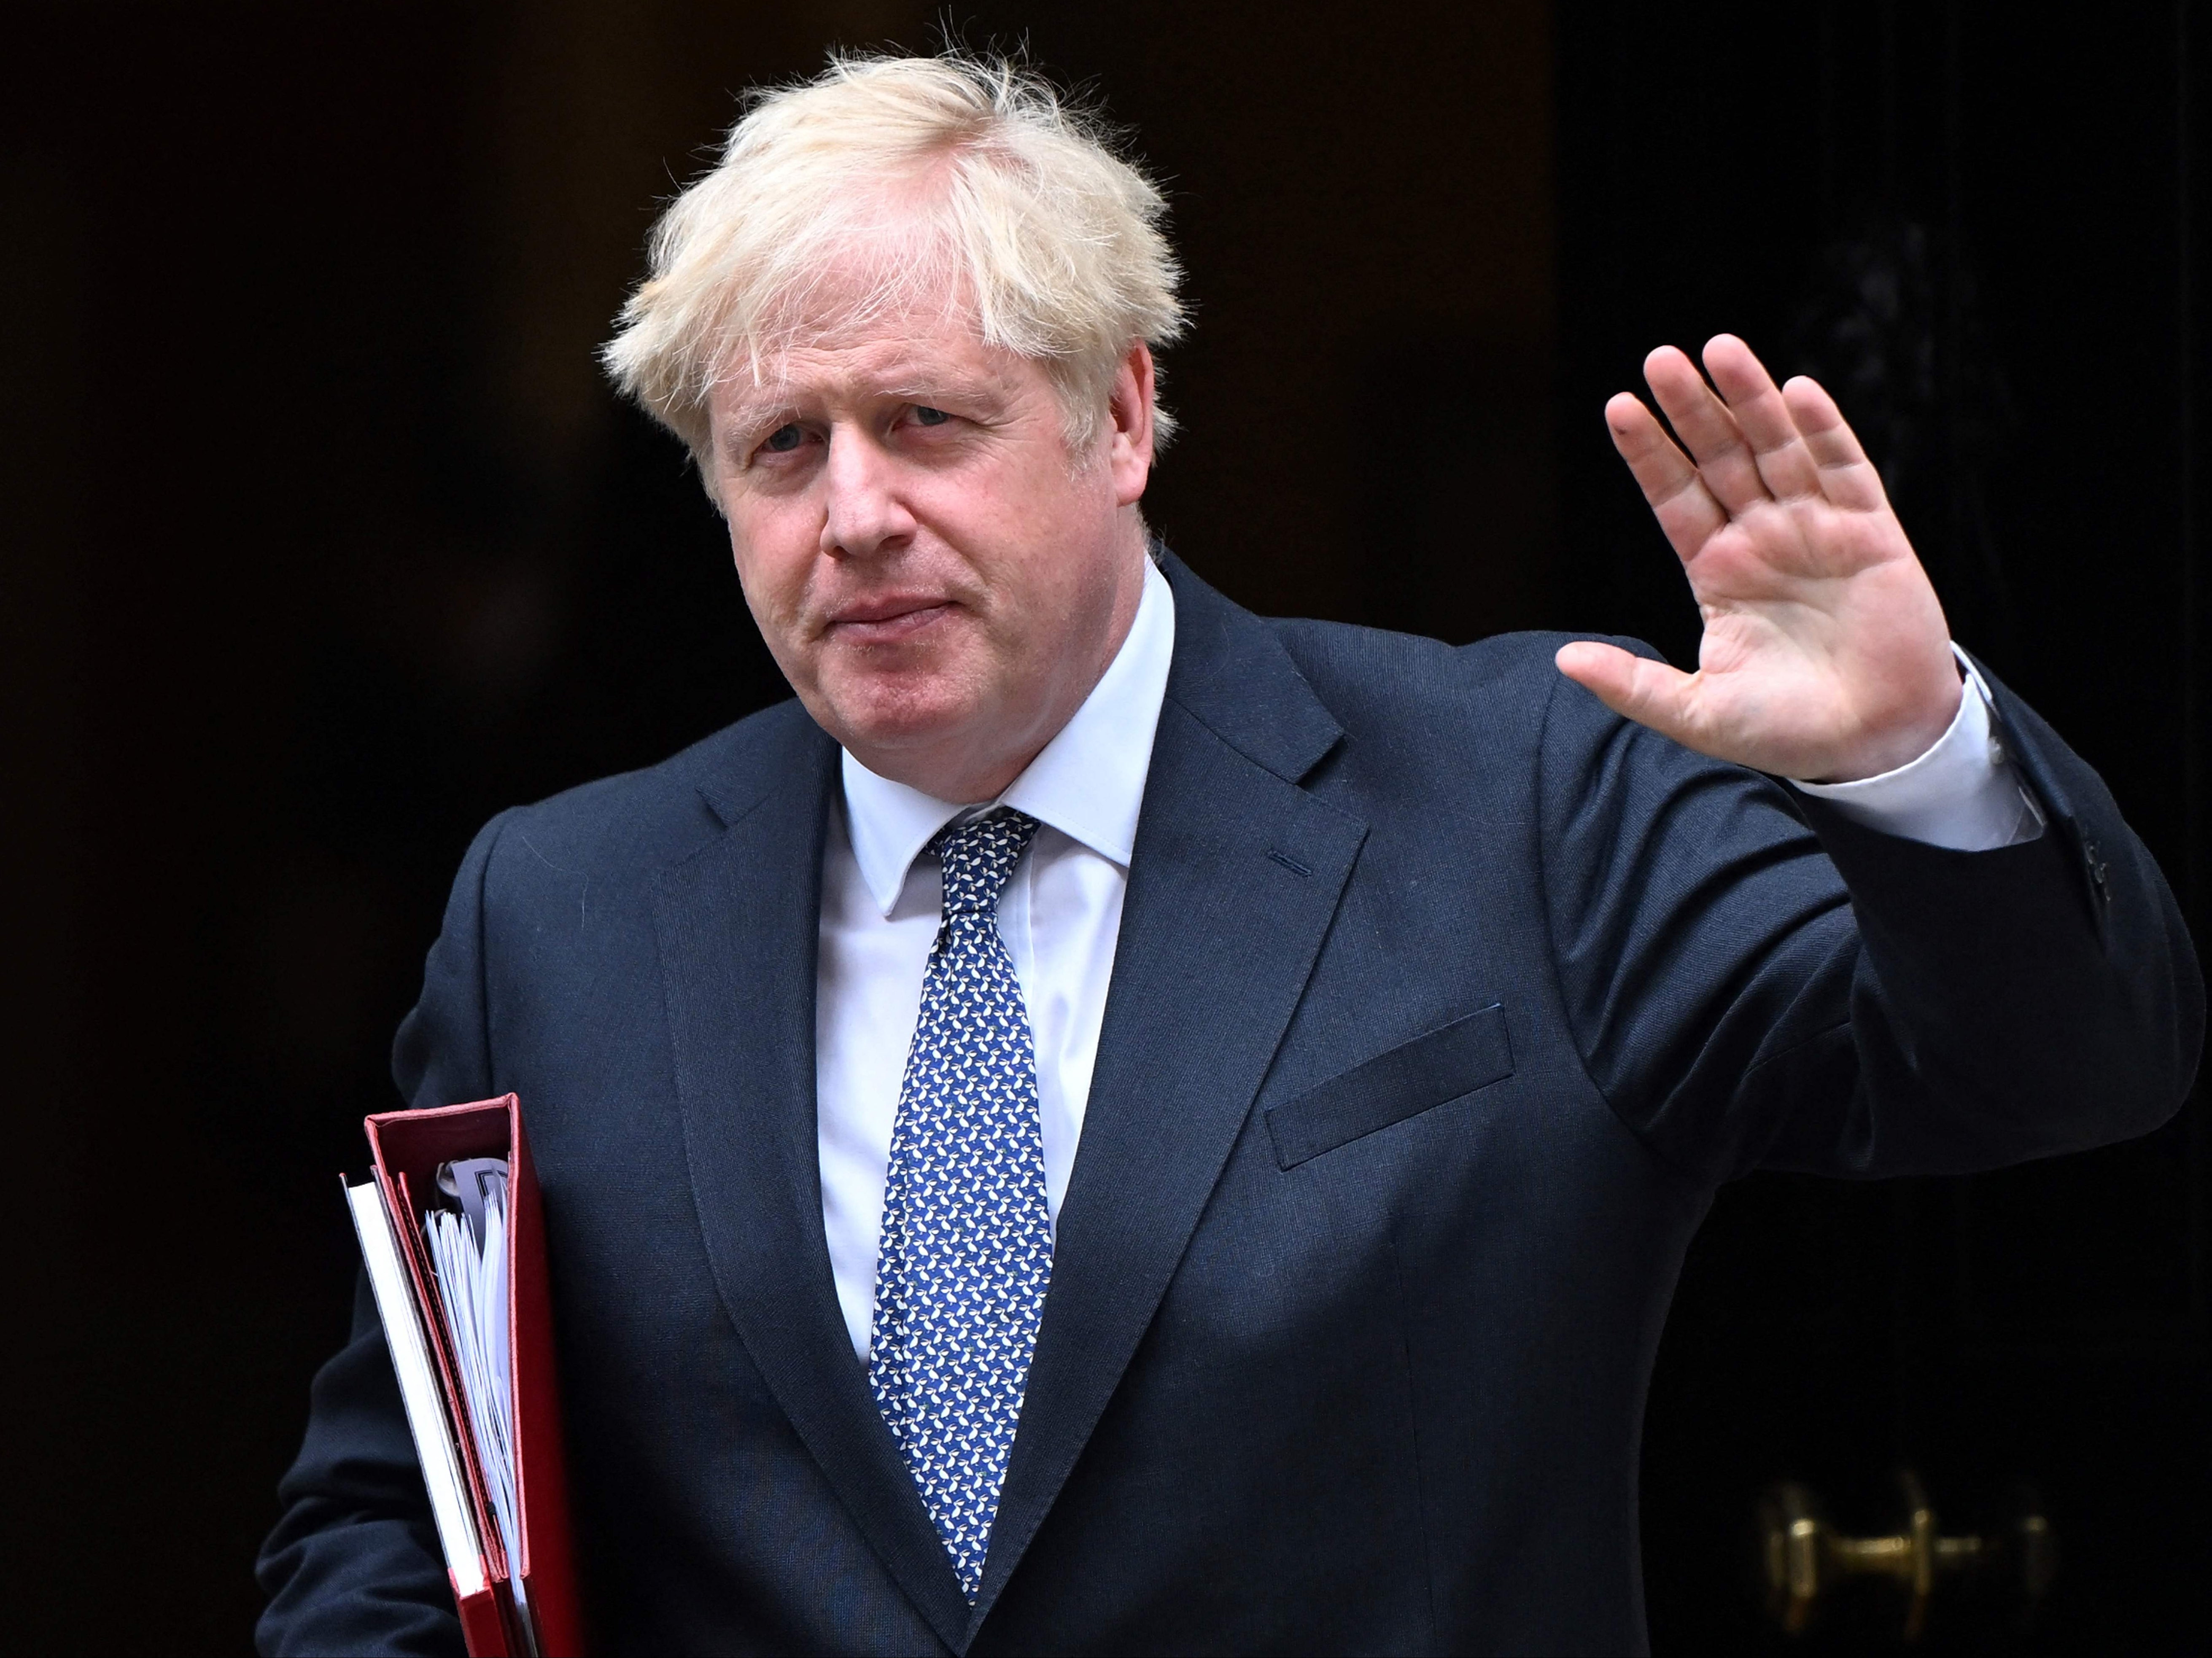 Mr Johnson may be itching to get back to writing his book about William Shakespeare